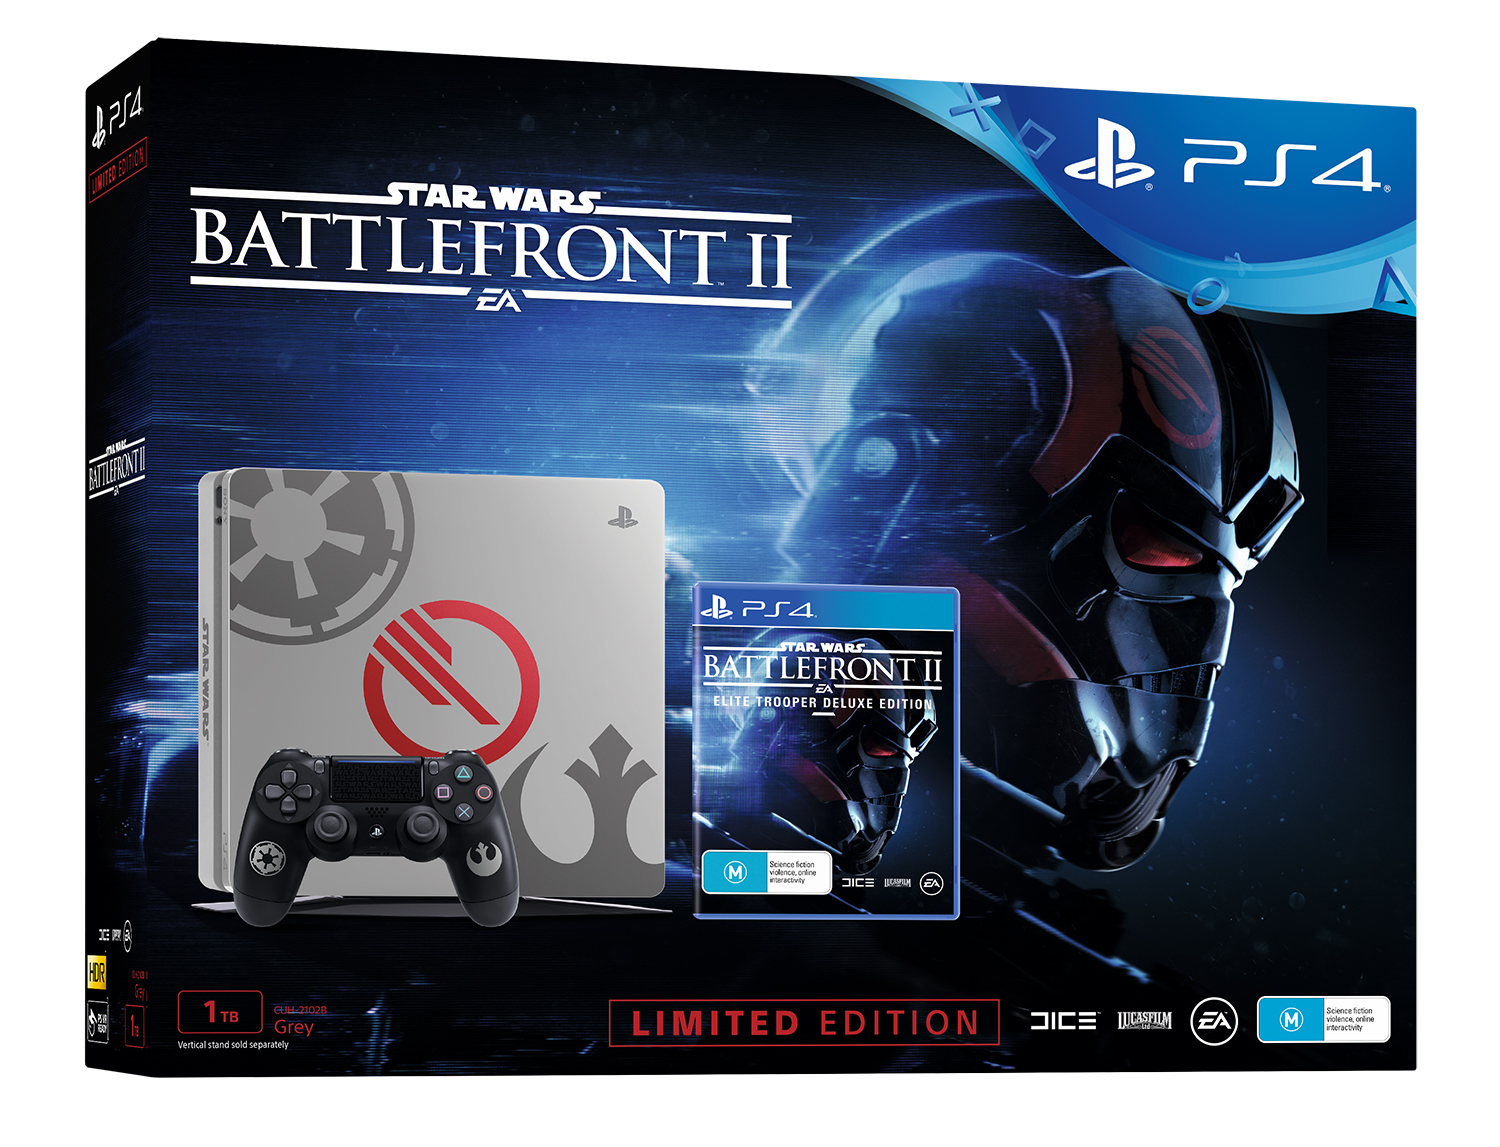 Star Wars Battlefront PS4 Console